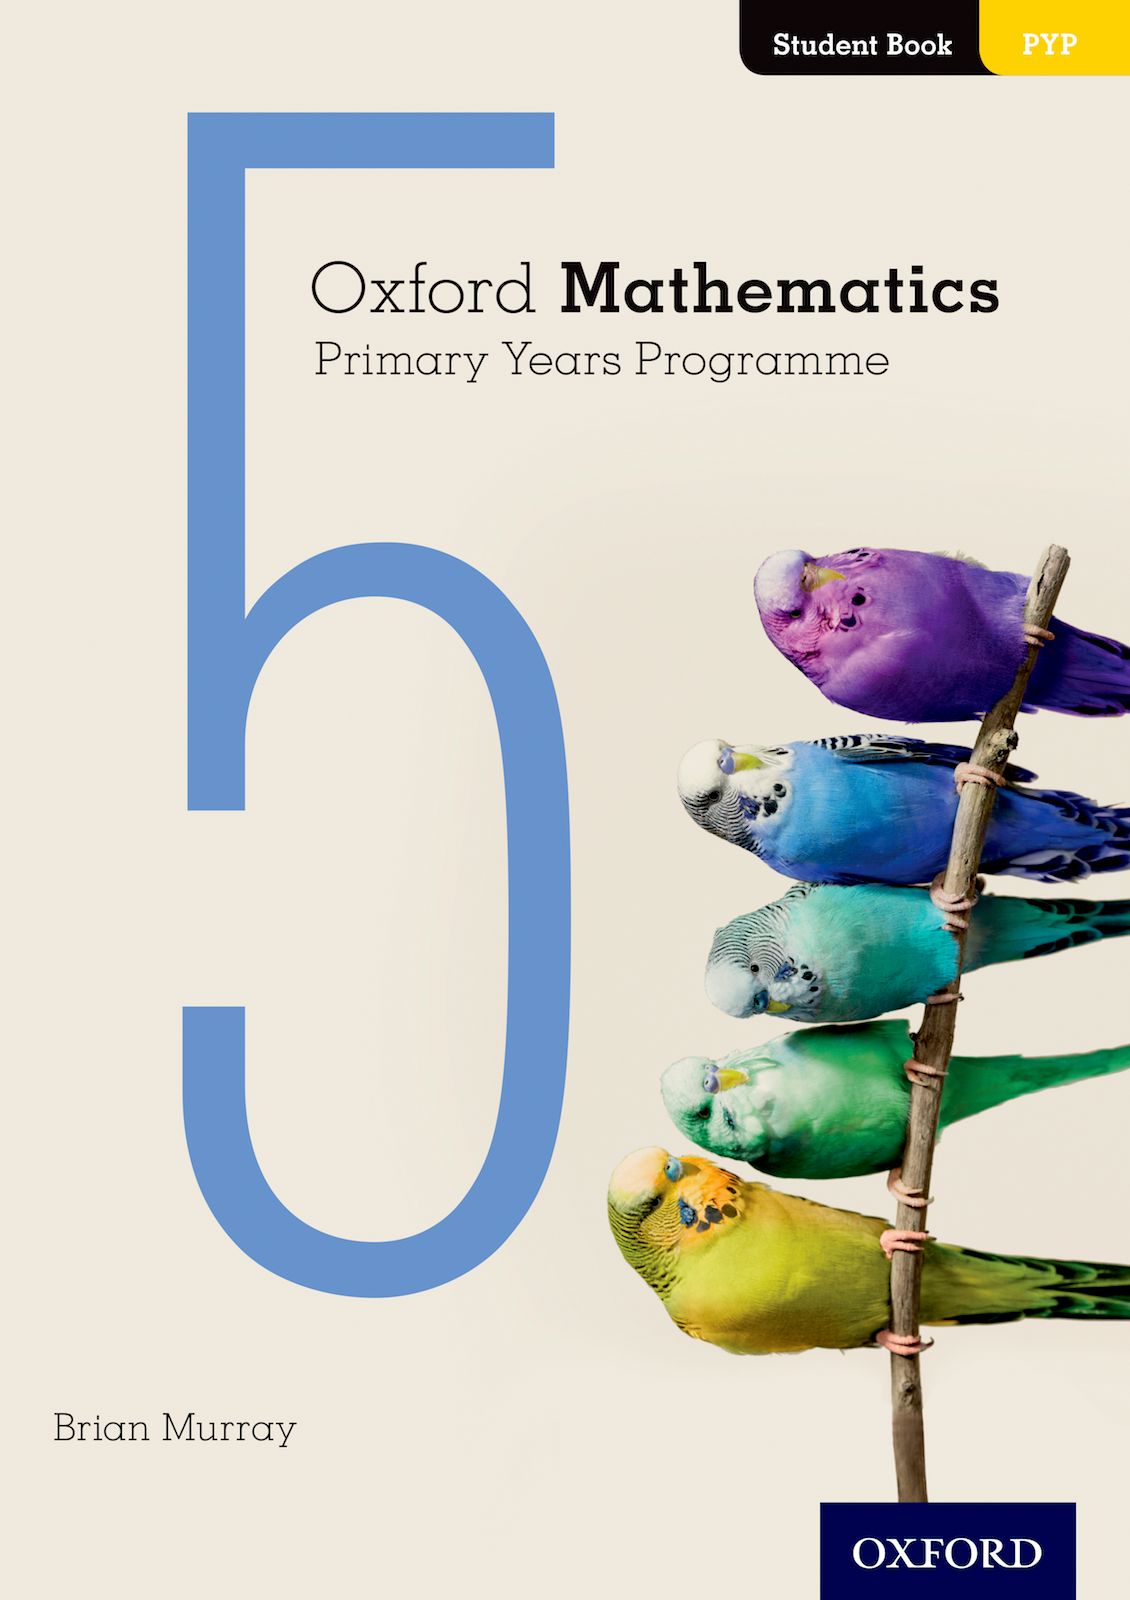 Featured image for “Oxford Mathematics Primary Years Programme Student Book 5”